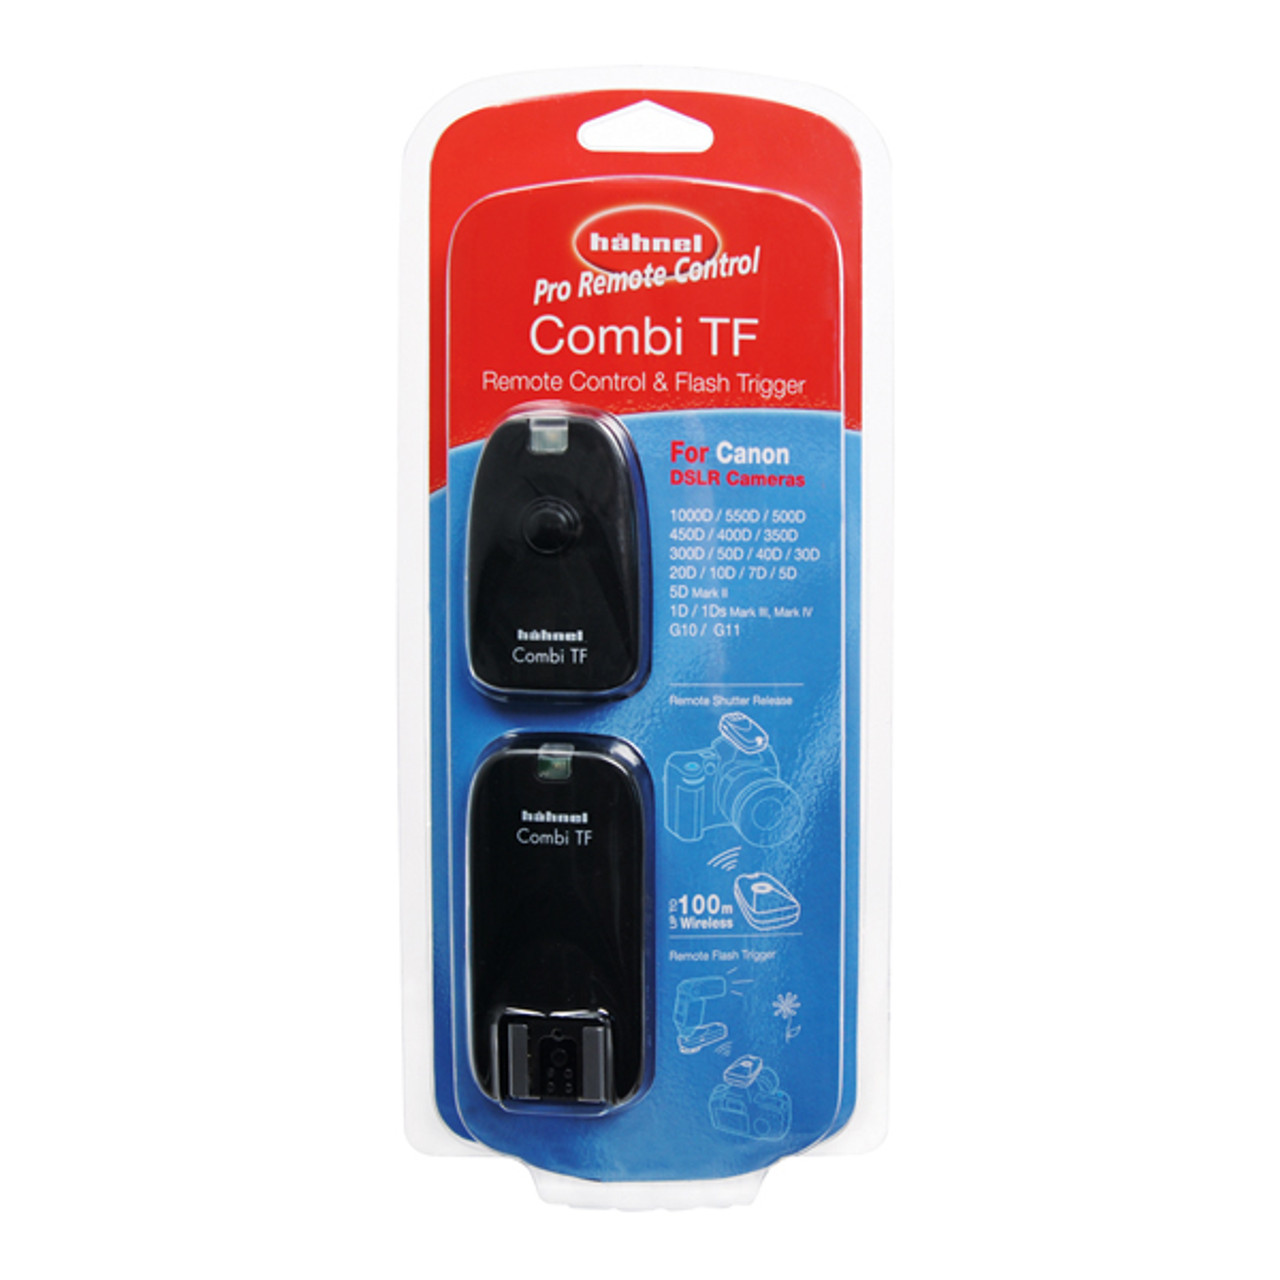 Hahnel Combi TF Remote Control and Flash Trigger for Canon